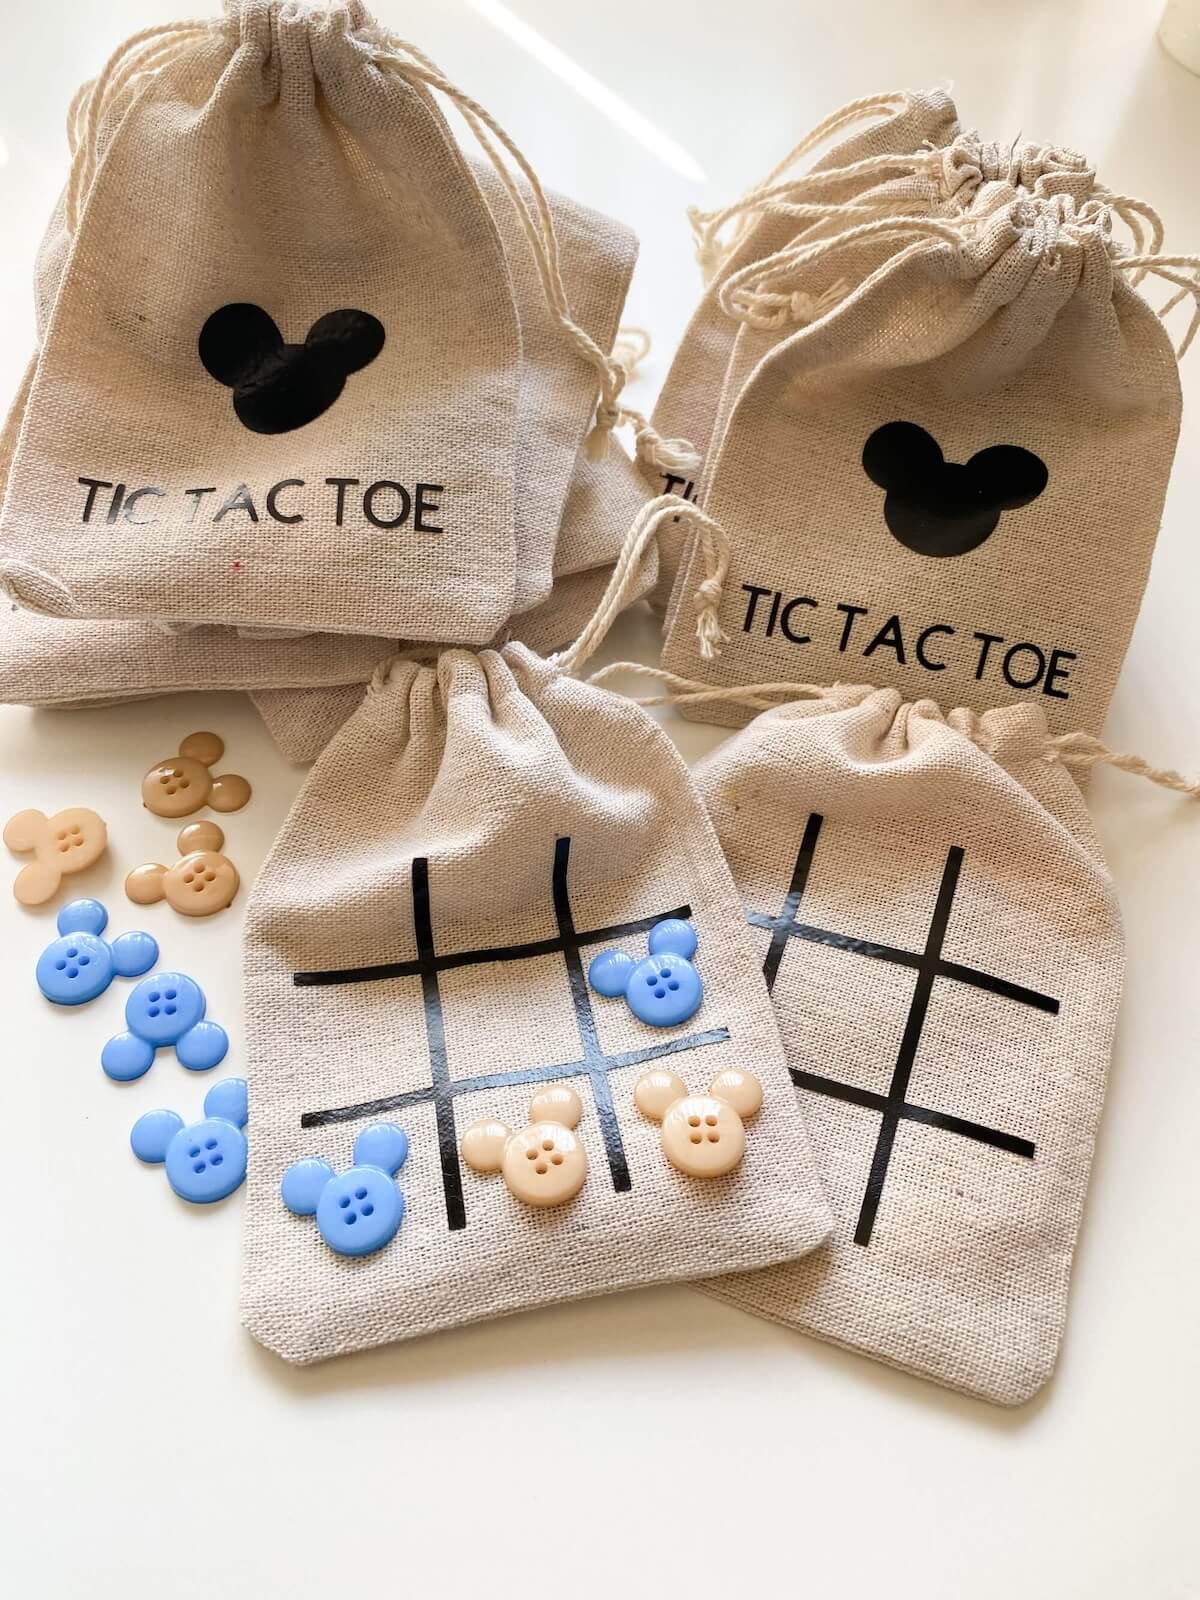 Diy cricut tic tac toe bags with mickey shaped buttons.